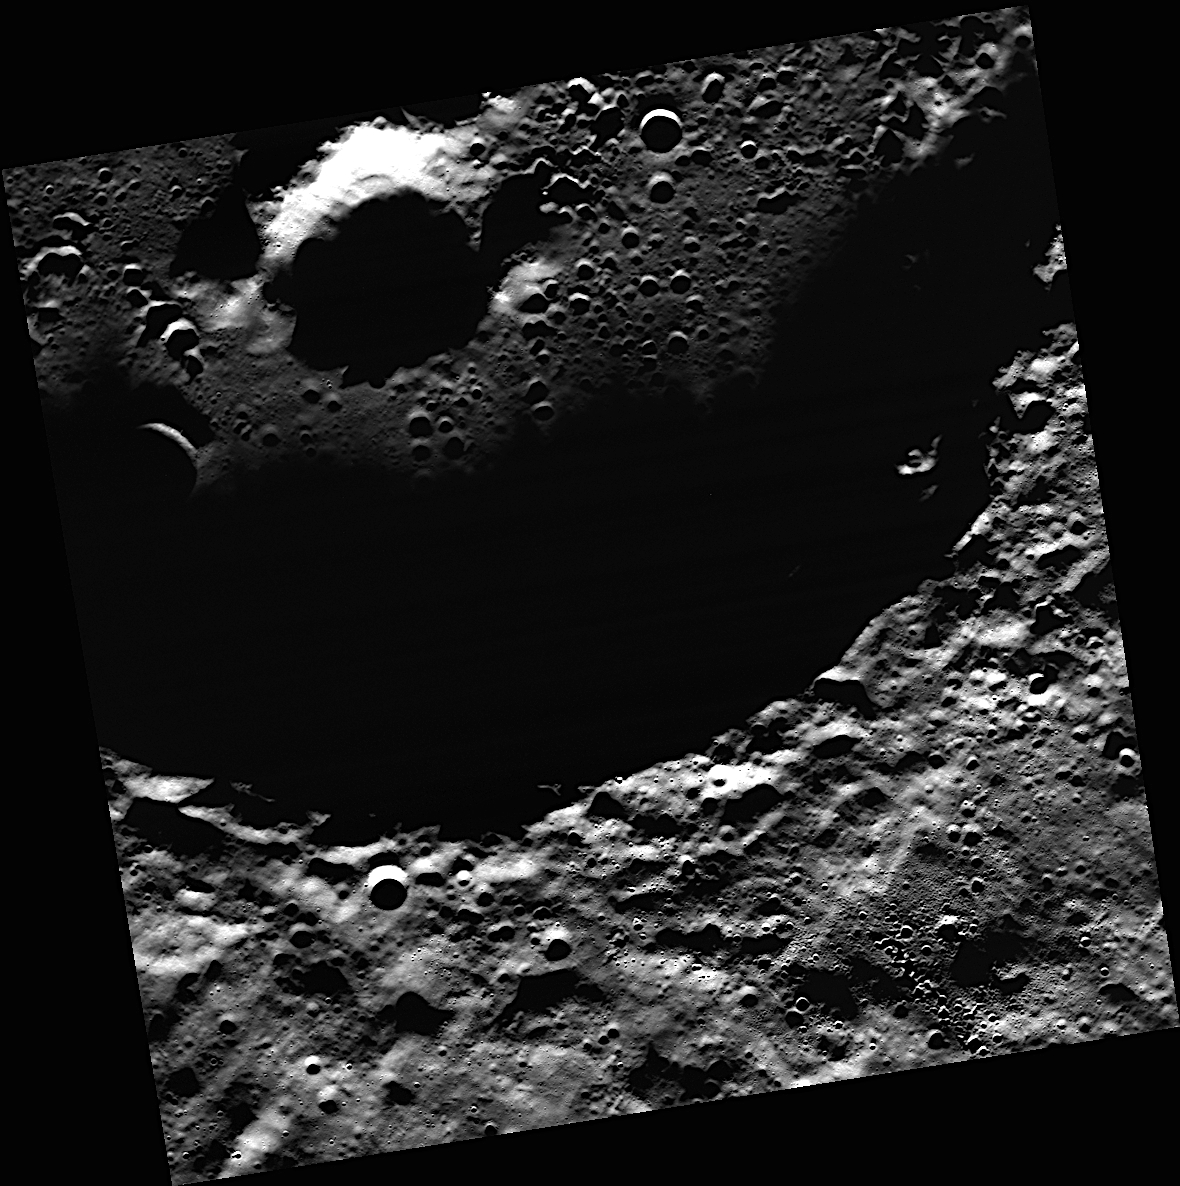 Prokofiev is the largest crater in Mercury’s north polar region to host radar-bright material.